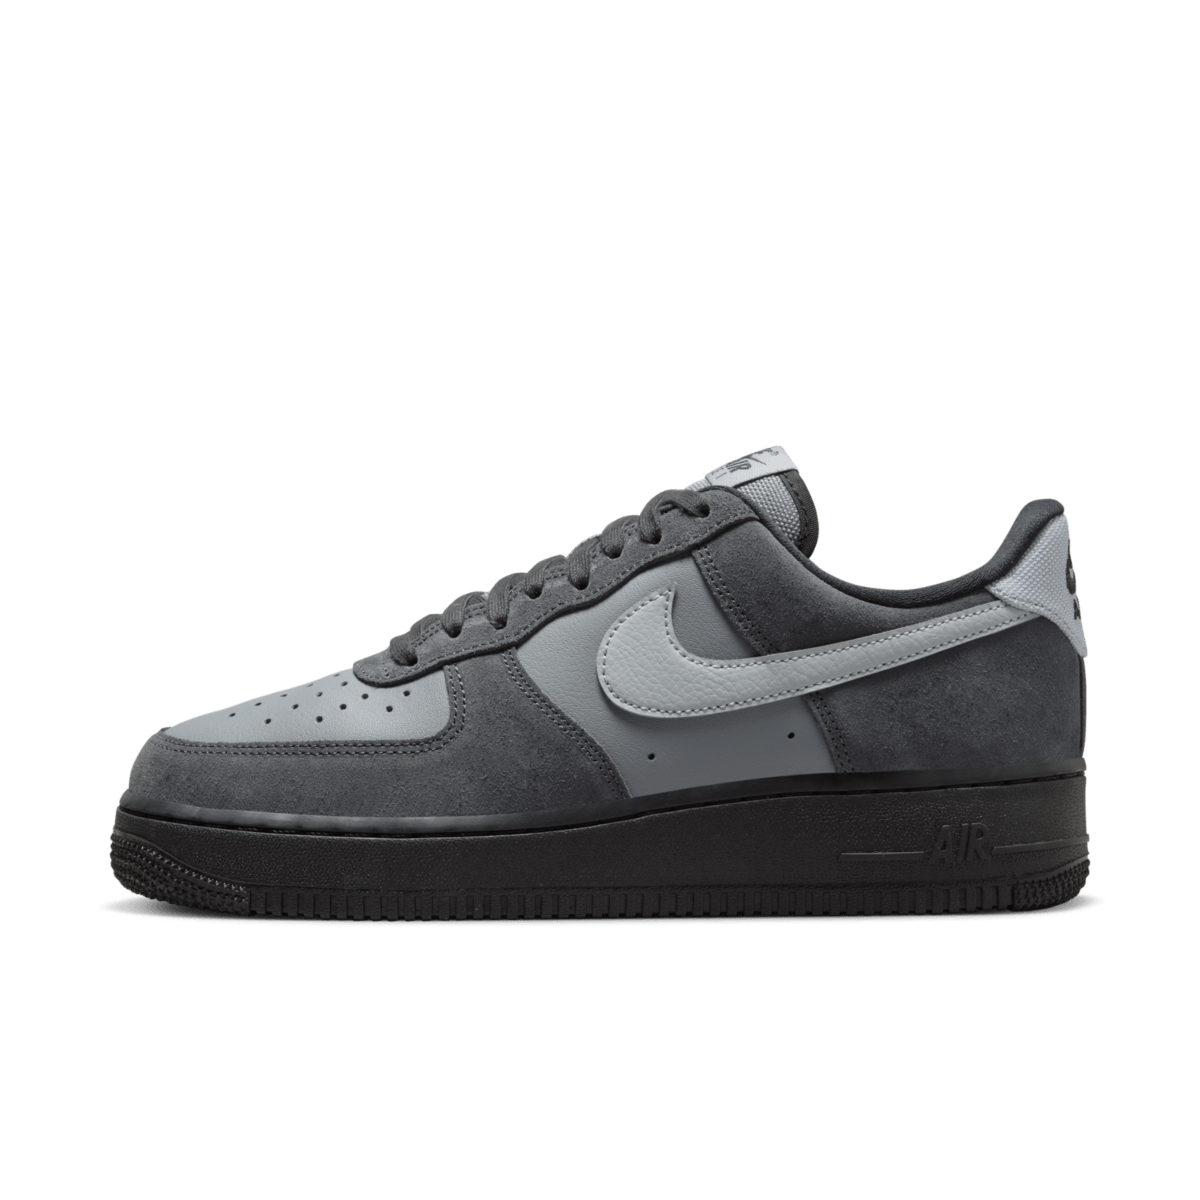 Nike Air Force 1 'Anthracite' CW7584-001